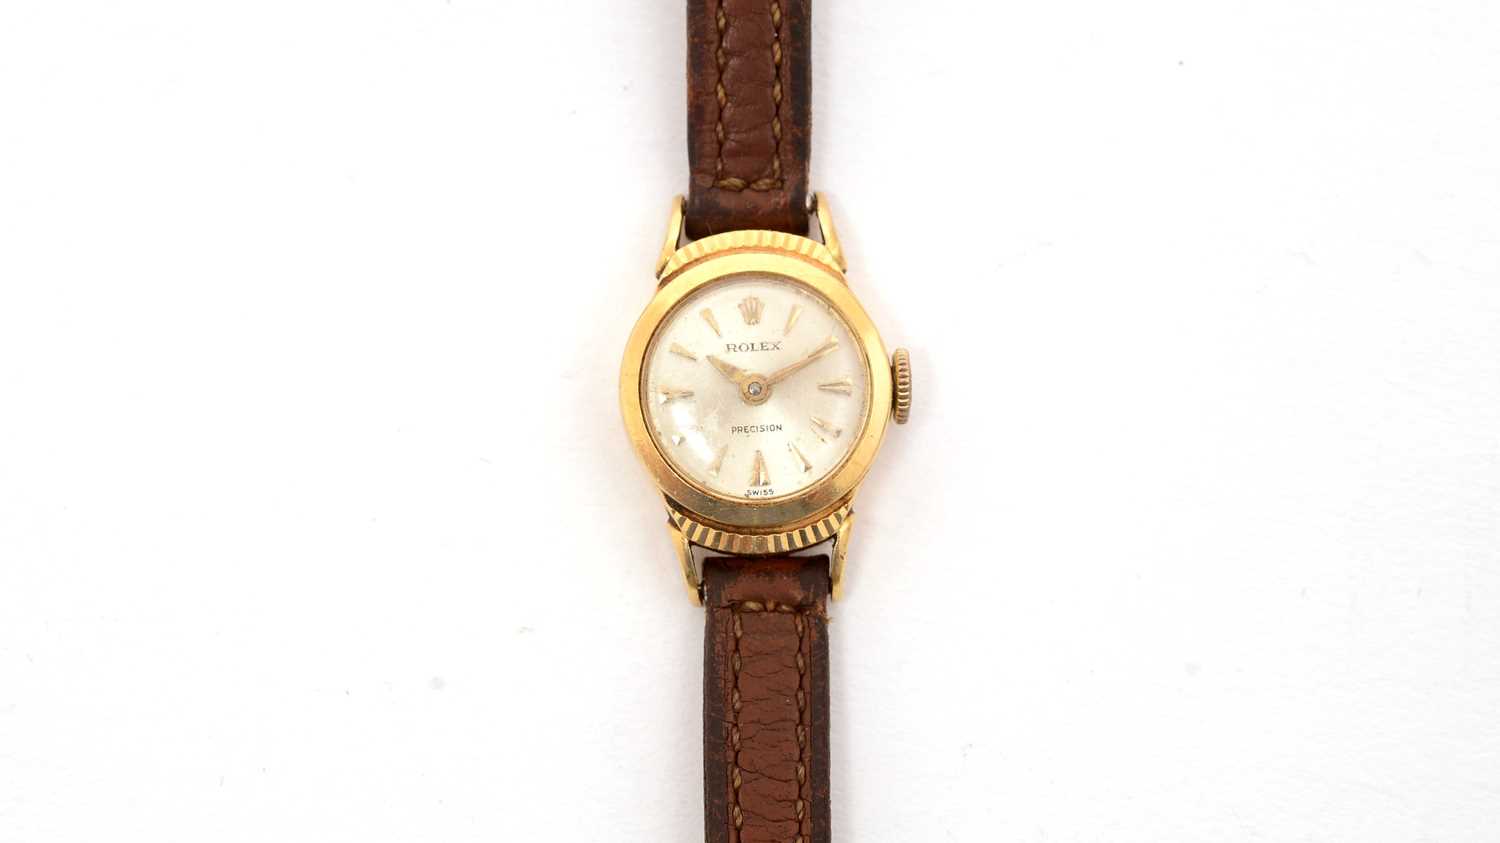 Lot 586 - Rolex Precision: an 18ct yellow gold cased lady's manual-wind cocktail watch